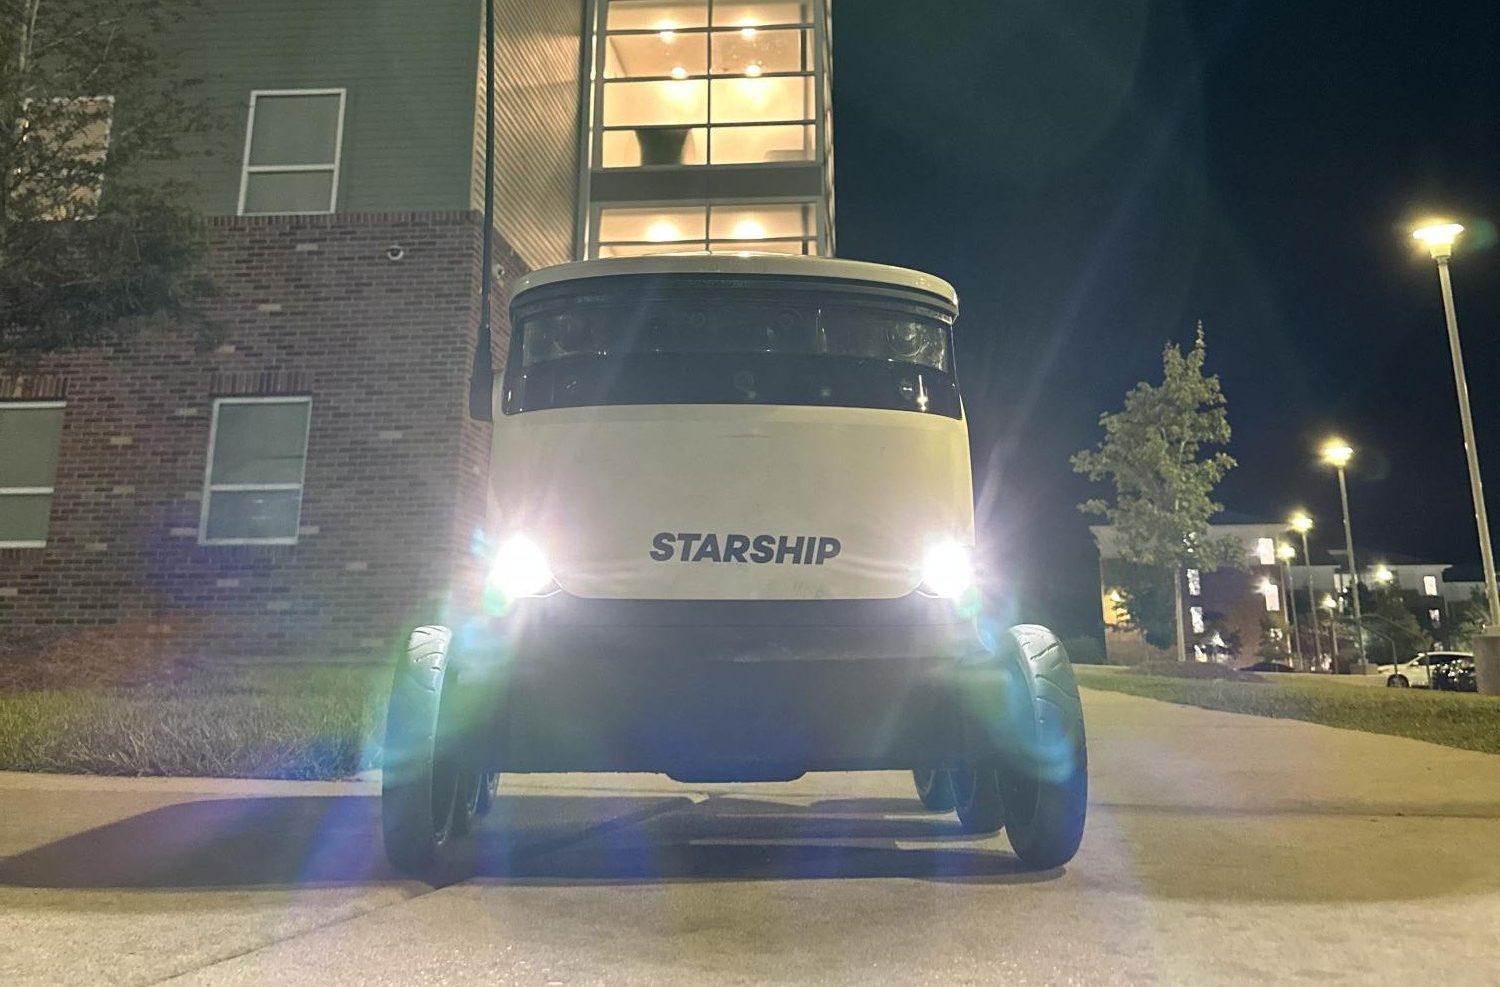 Meet one of the eight new Southeastern food delivery robot. This one just made its way from the Union to Twelve Oaks Hall.